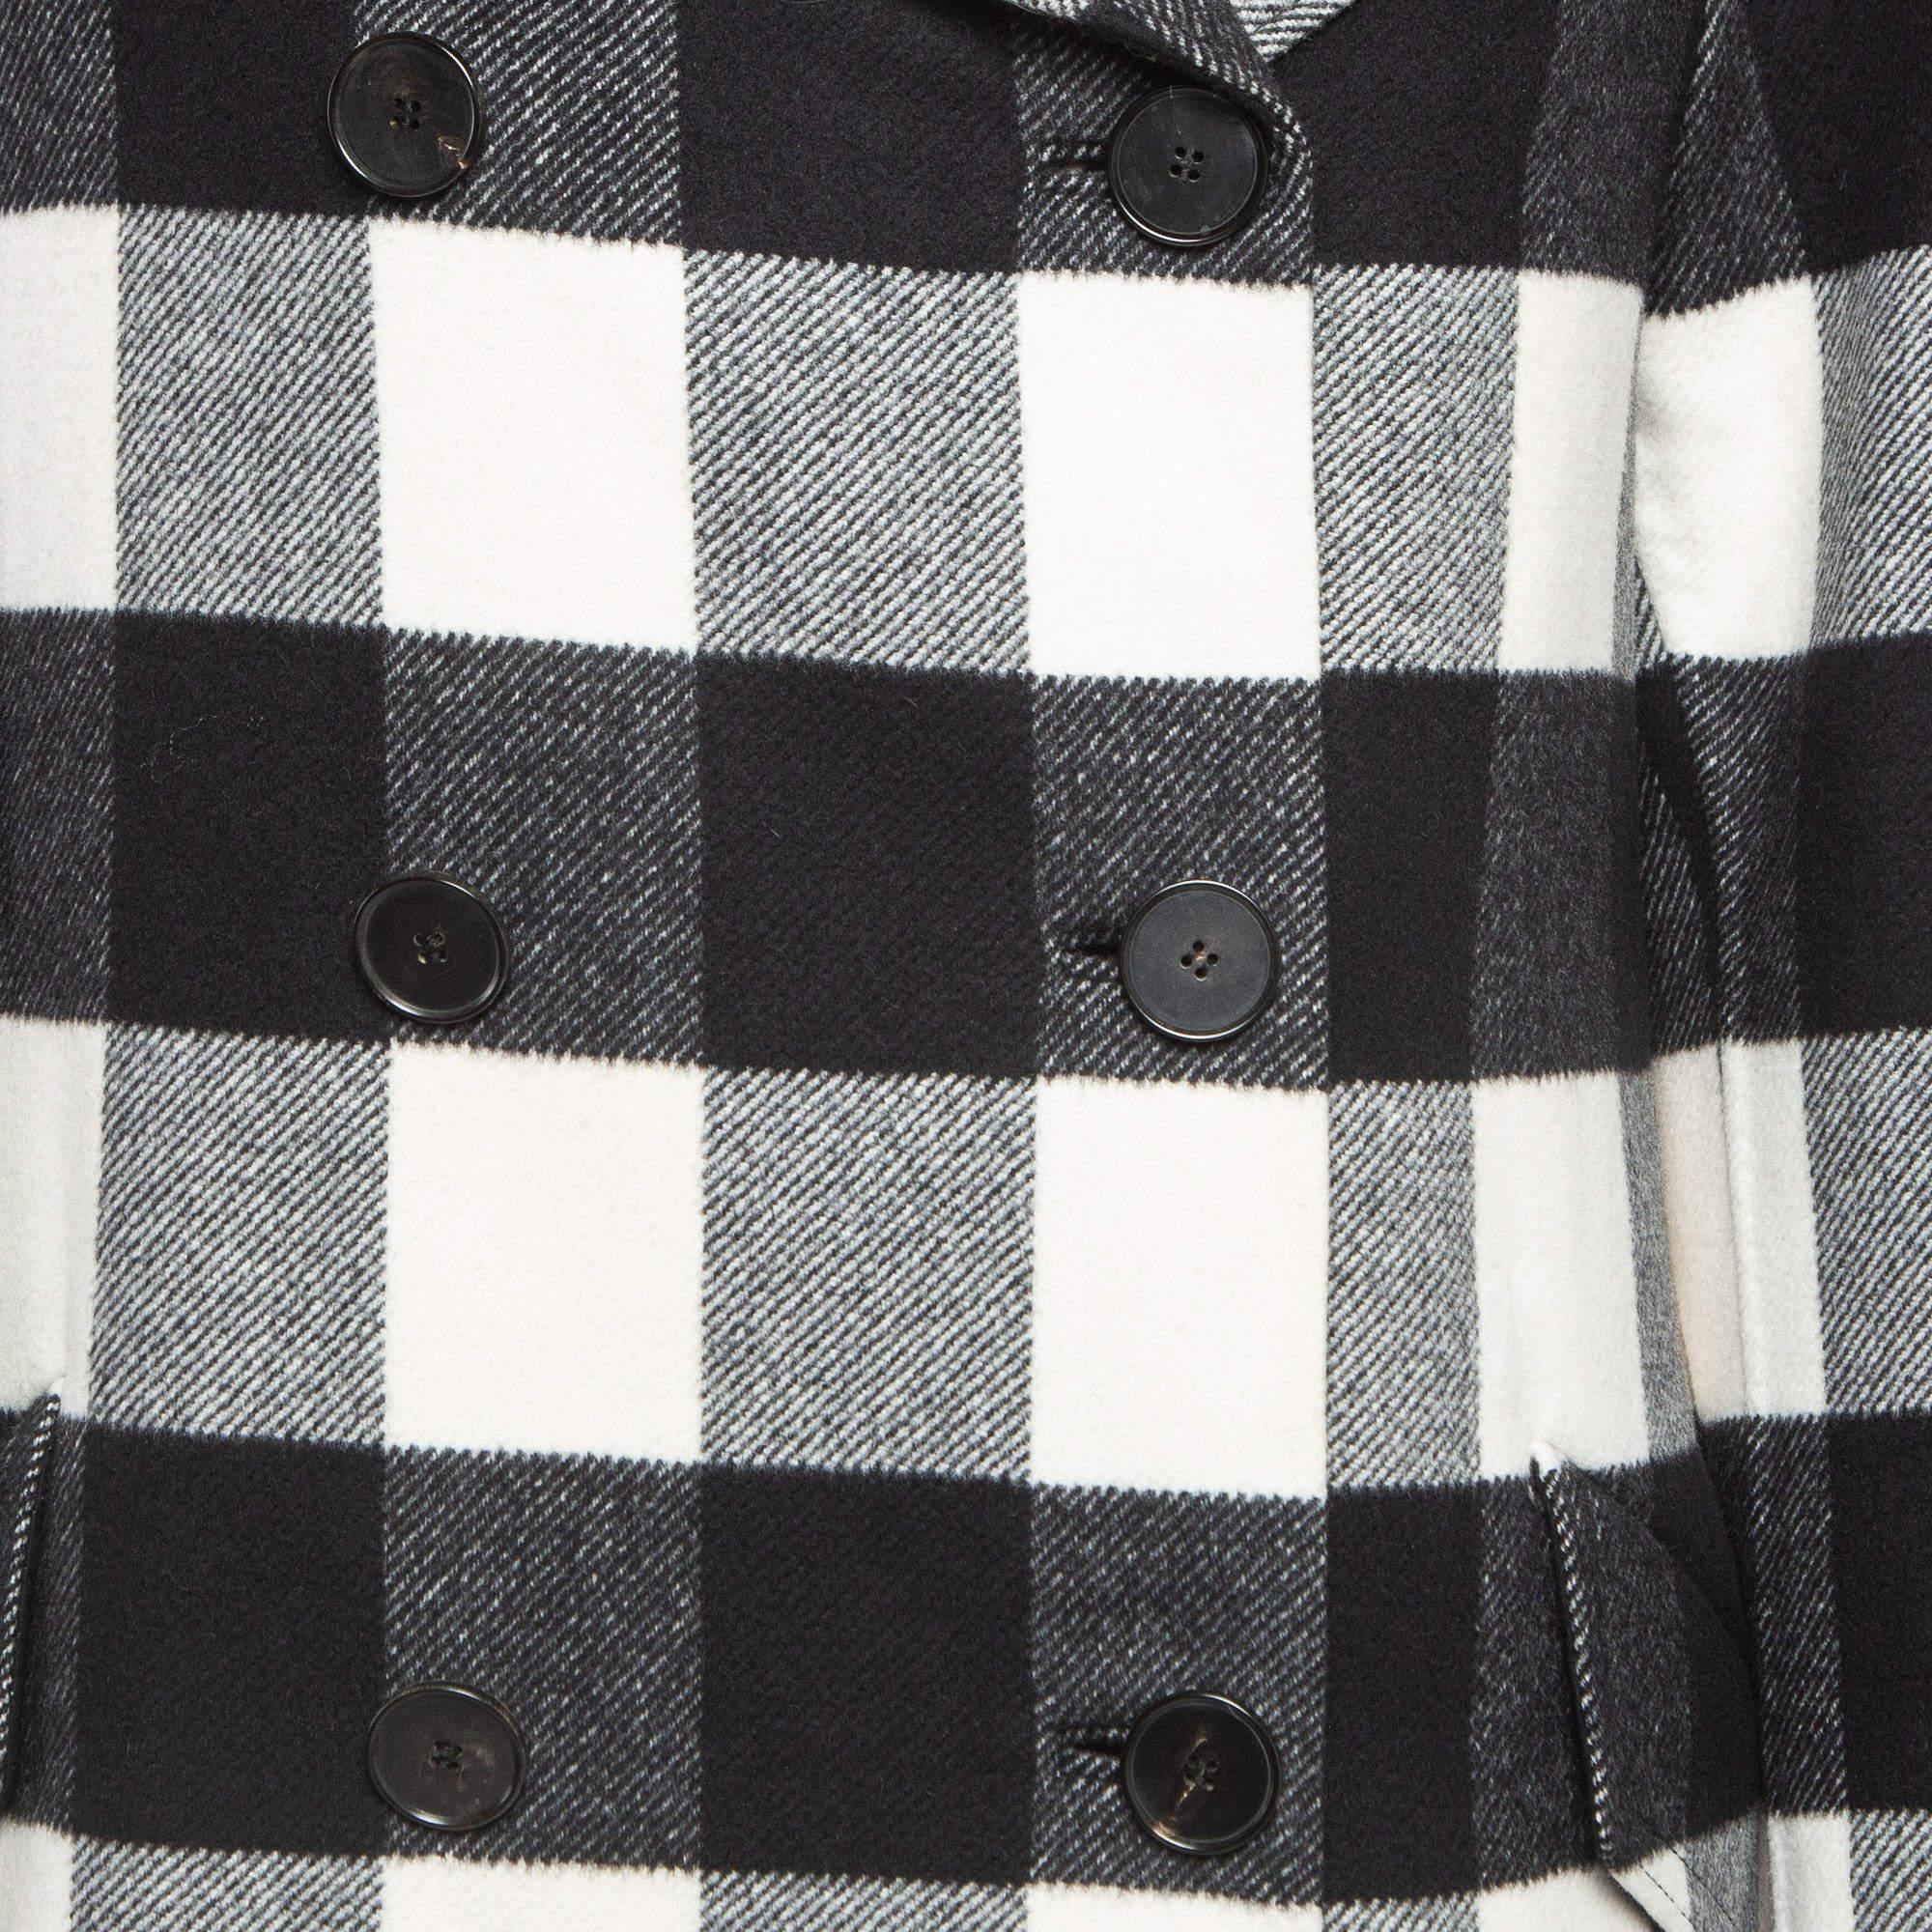 Dior Black/White Gingham Wool Double Breasted Coat M In Good Condition For Sale In Dubai, Al Qouz 2